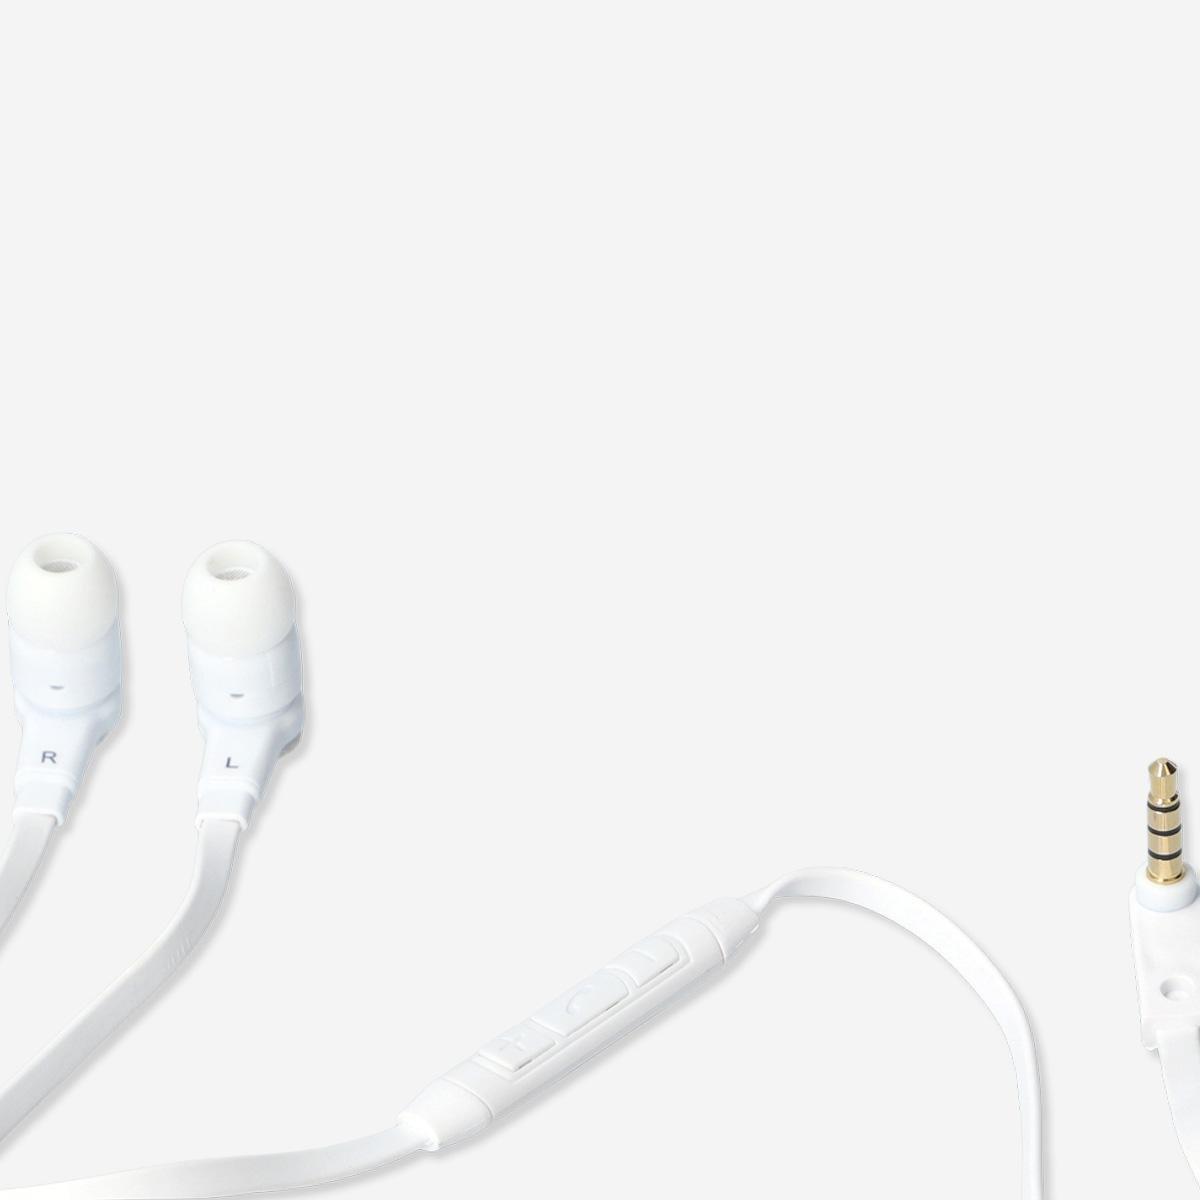 White earphones with microphone